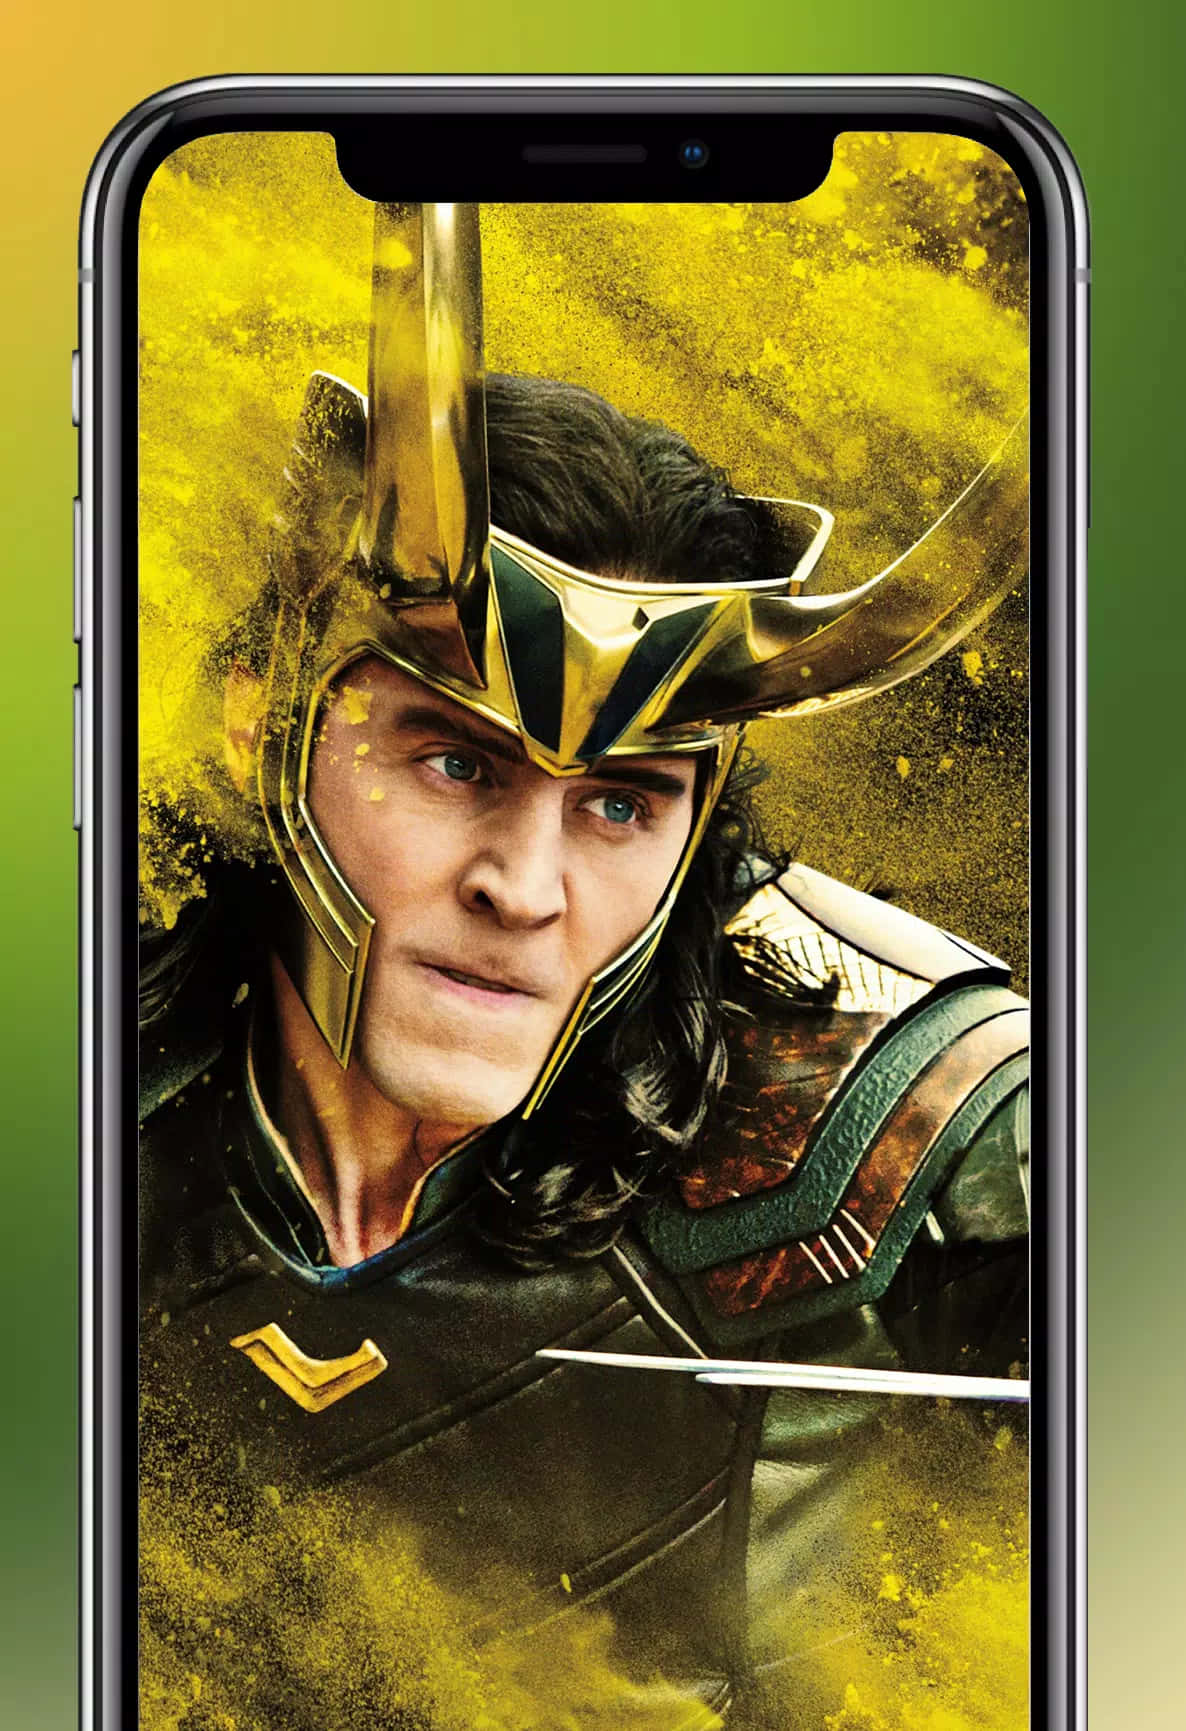 Fueled by mischief and chaos, Marvel's iconic character Loki continues to mesmerize comic-book and movie fans alike. Wallpaper